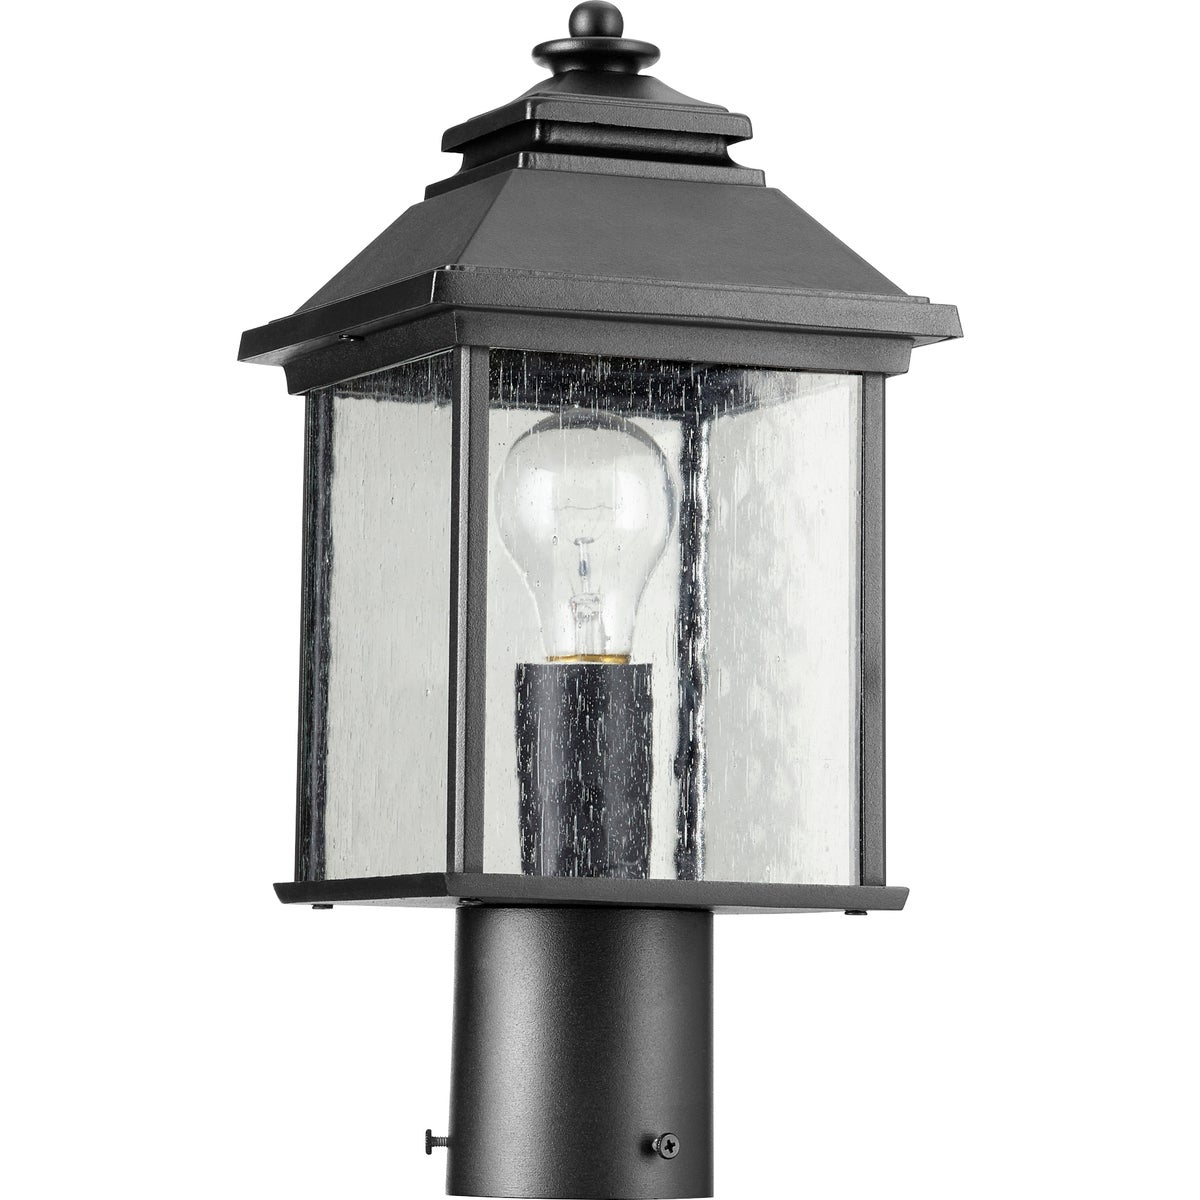 Pearson Black Traditional Outdoor Post Light